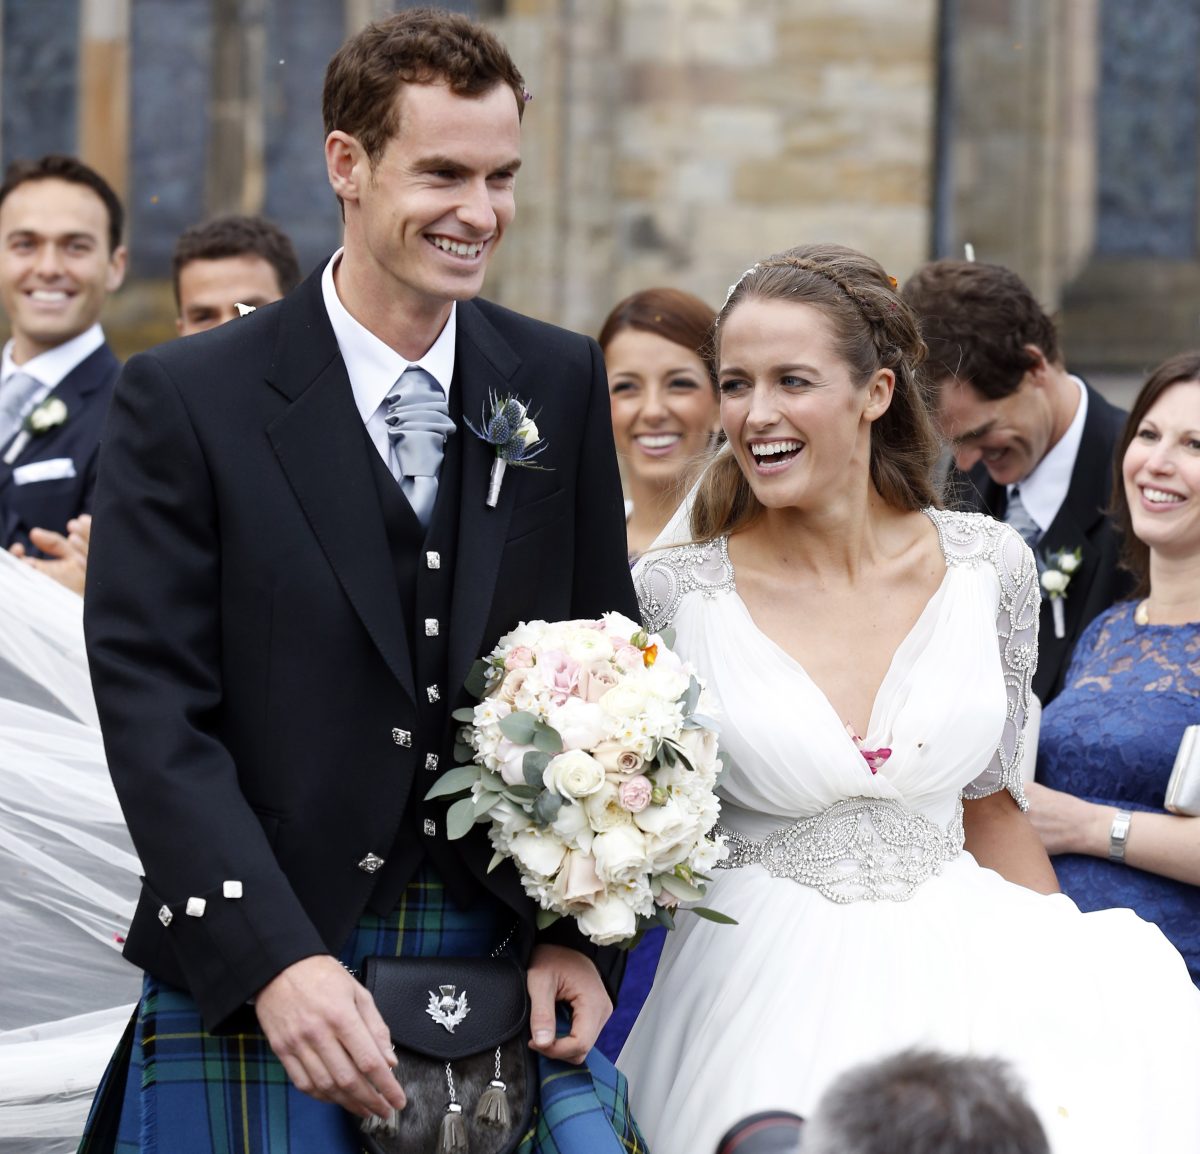 Andy Murray and Kim Sears leave Dunblane Cathedral after their wedding in Dunblane, Scotland